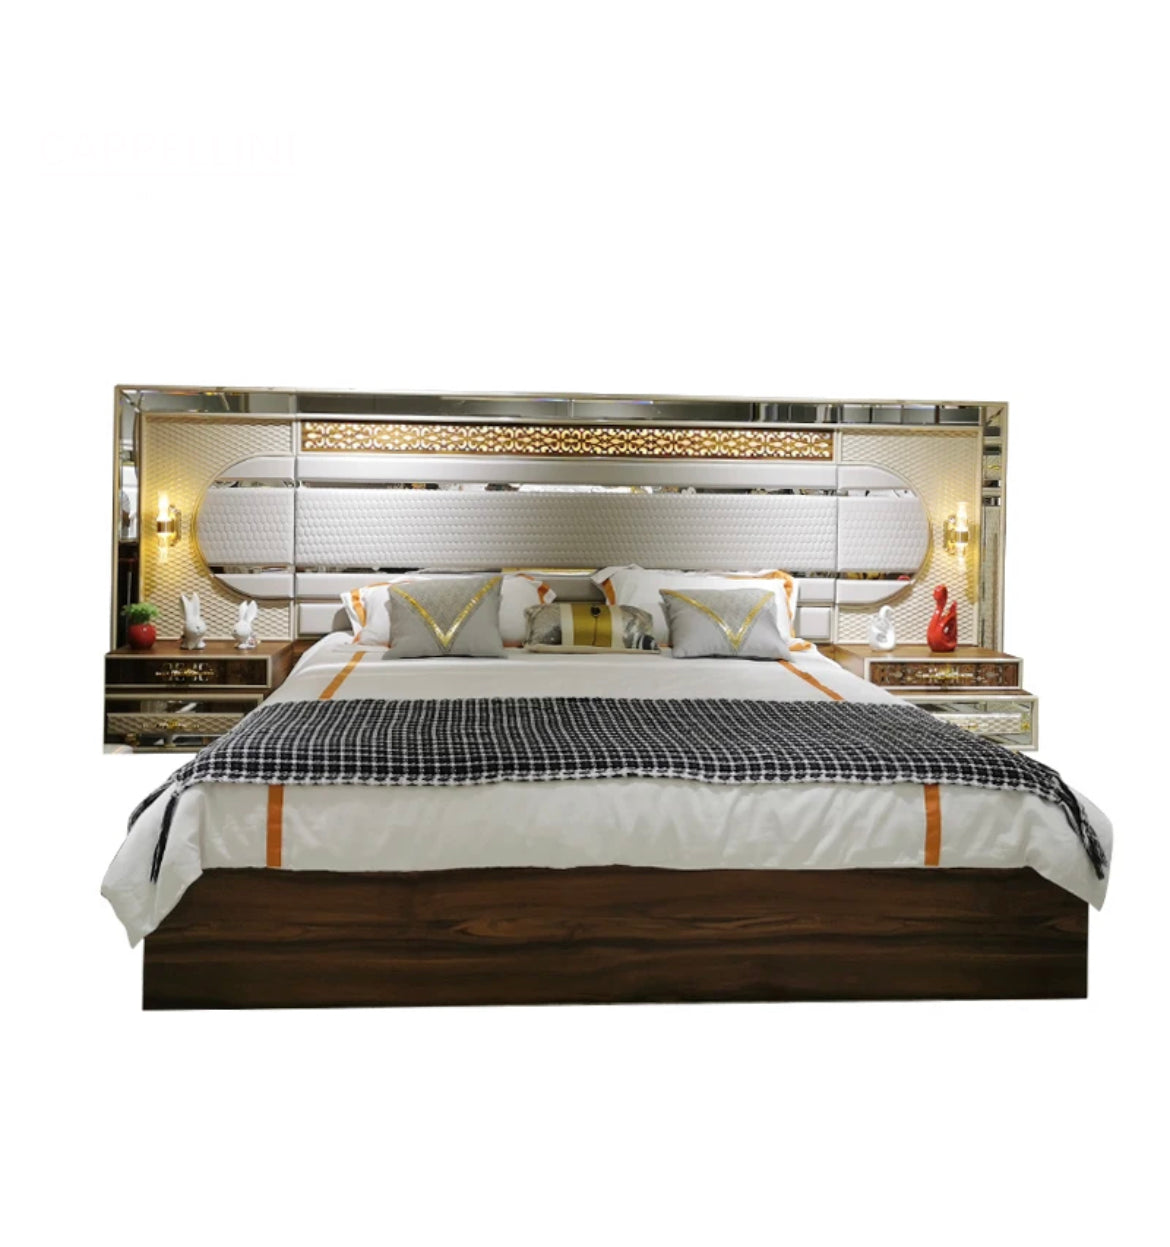 Home Furniture Mirrored Headboard Bedroom Set Solid Wood King Size Luxurious Bedroom Furniture Sets